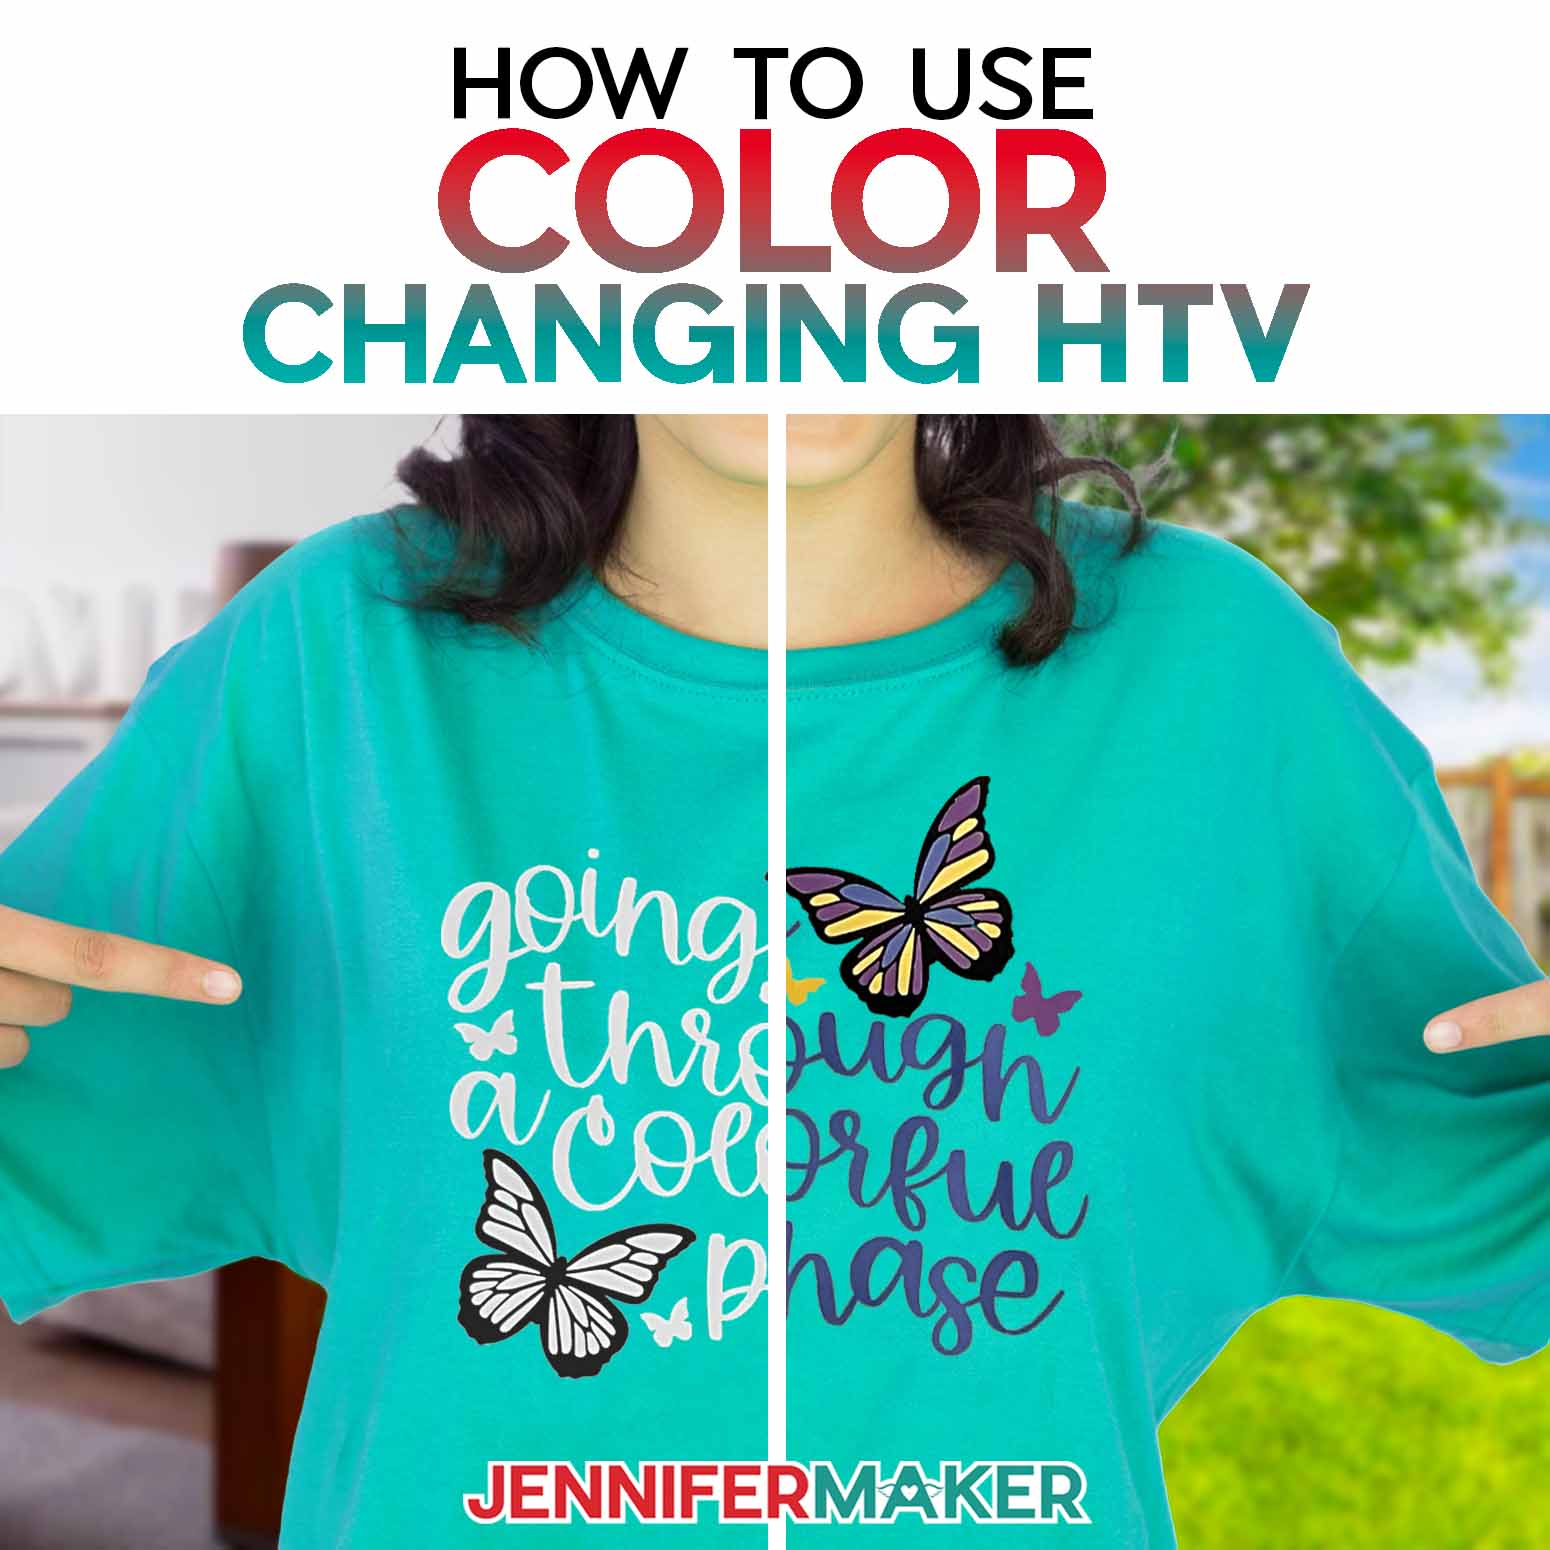 Model wearing a green shirt with a UV reactive color changing design on it with butterflies that says "Going Through a Colorful Phase". Learn to use color changing HTV with JenniferMaker's tutorial!